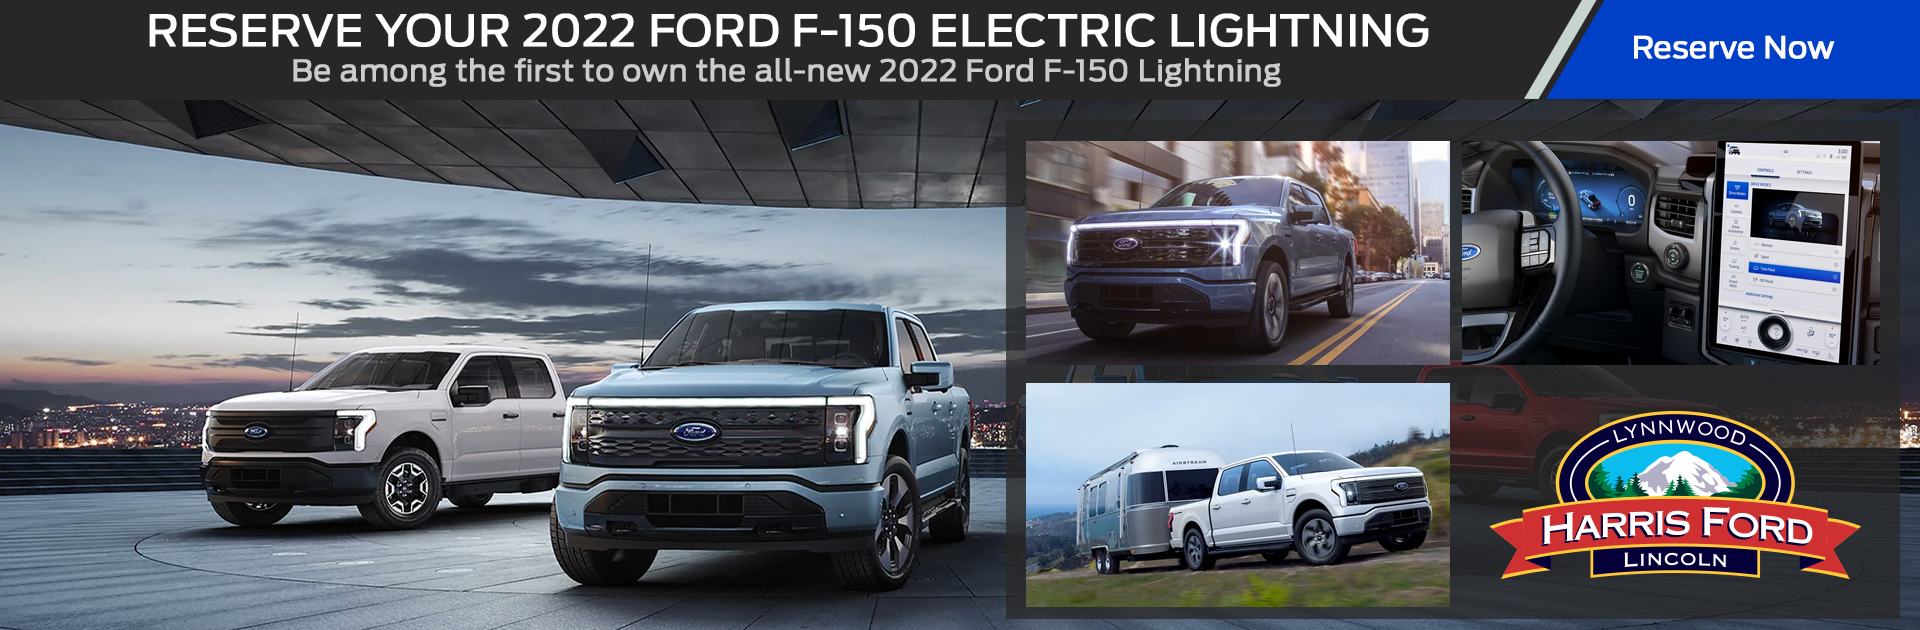 Reserve your 2022 Ford F-150 Electric Lightning